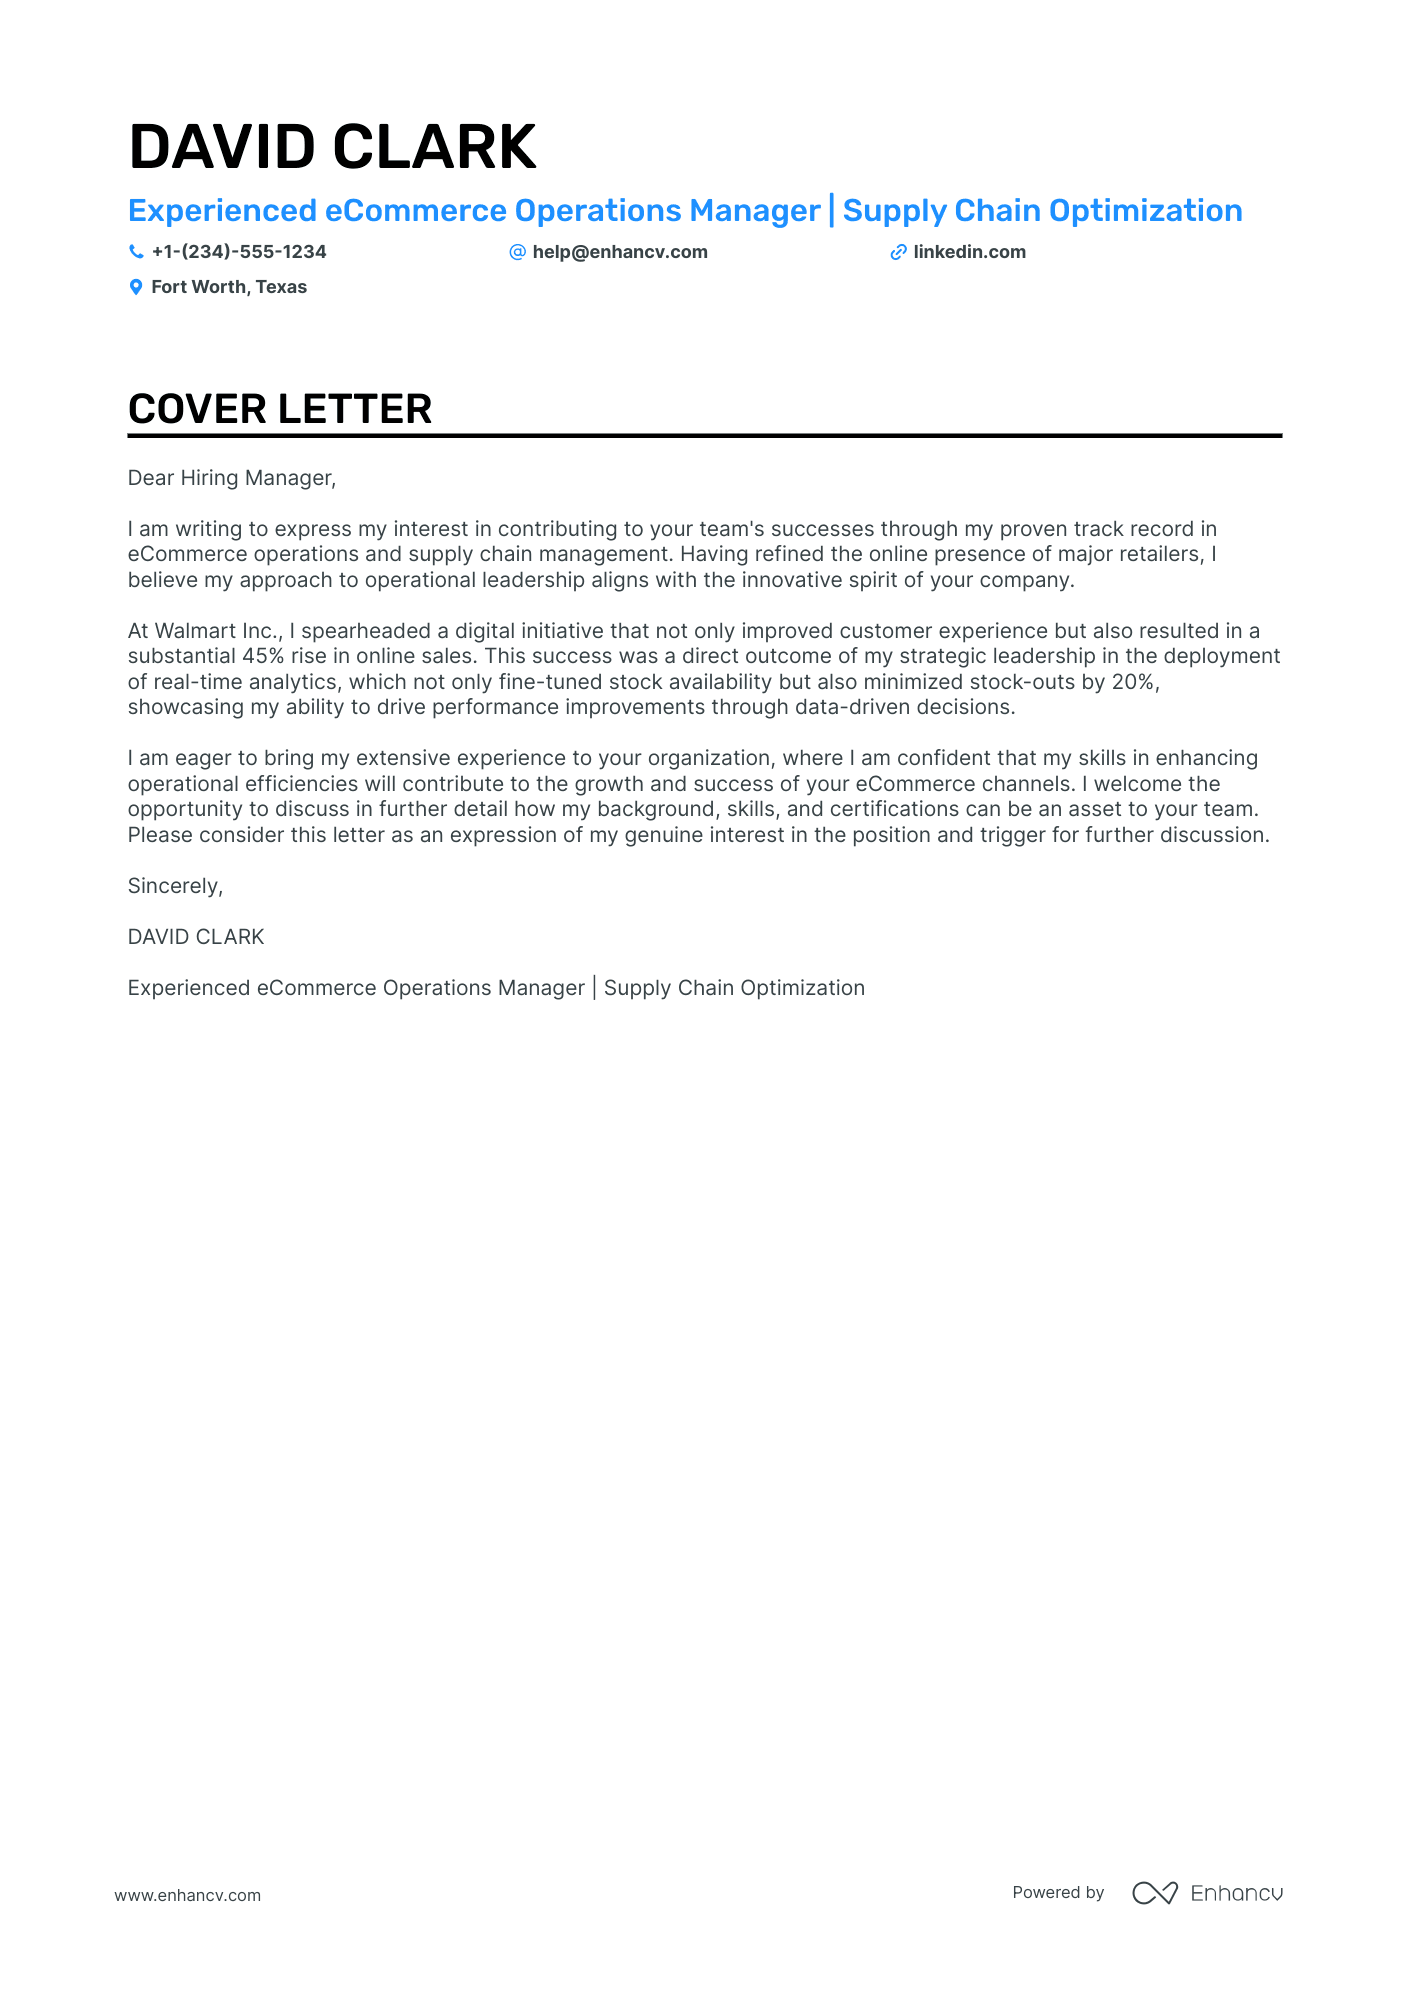 operational manager cover letter